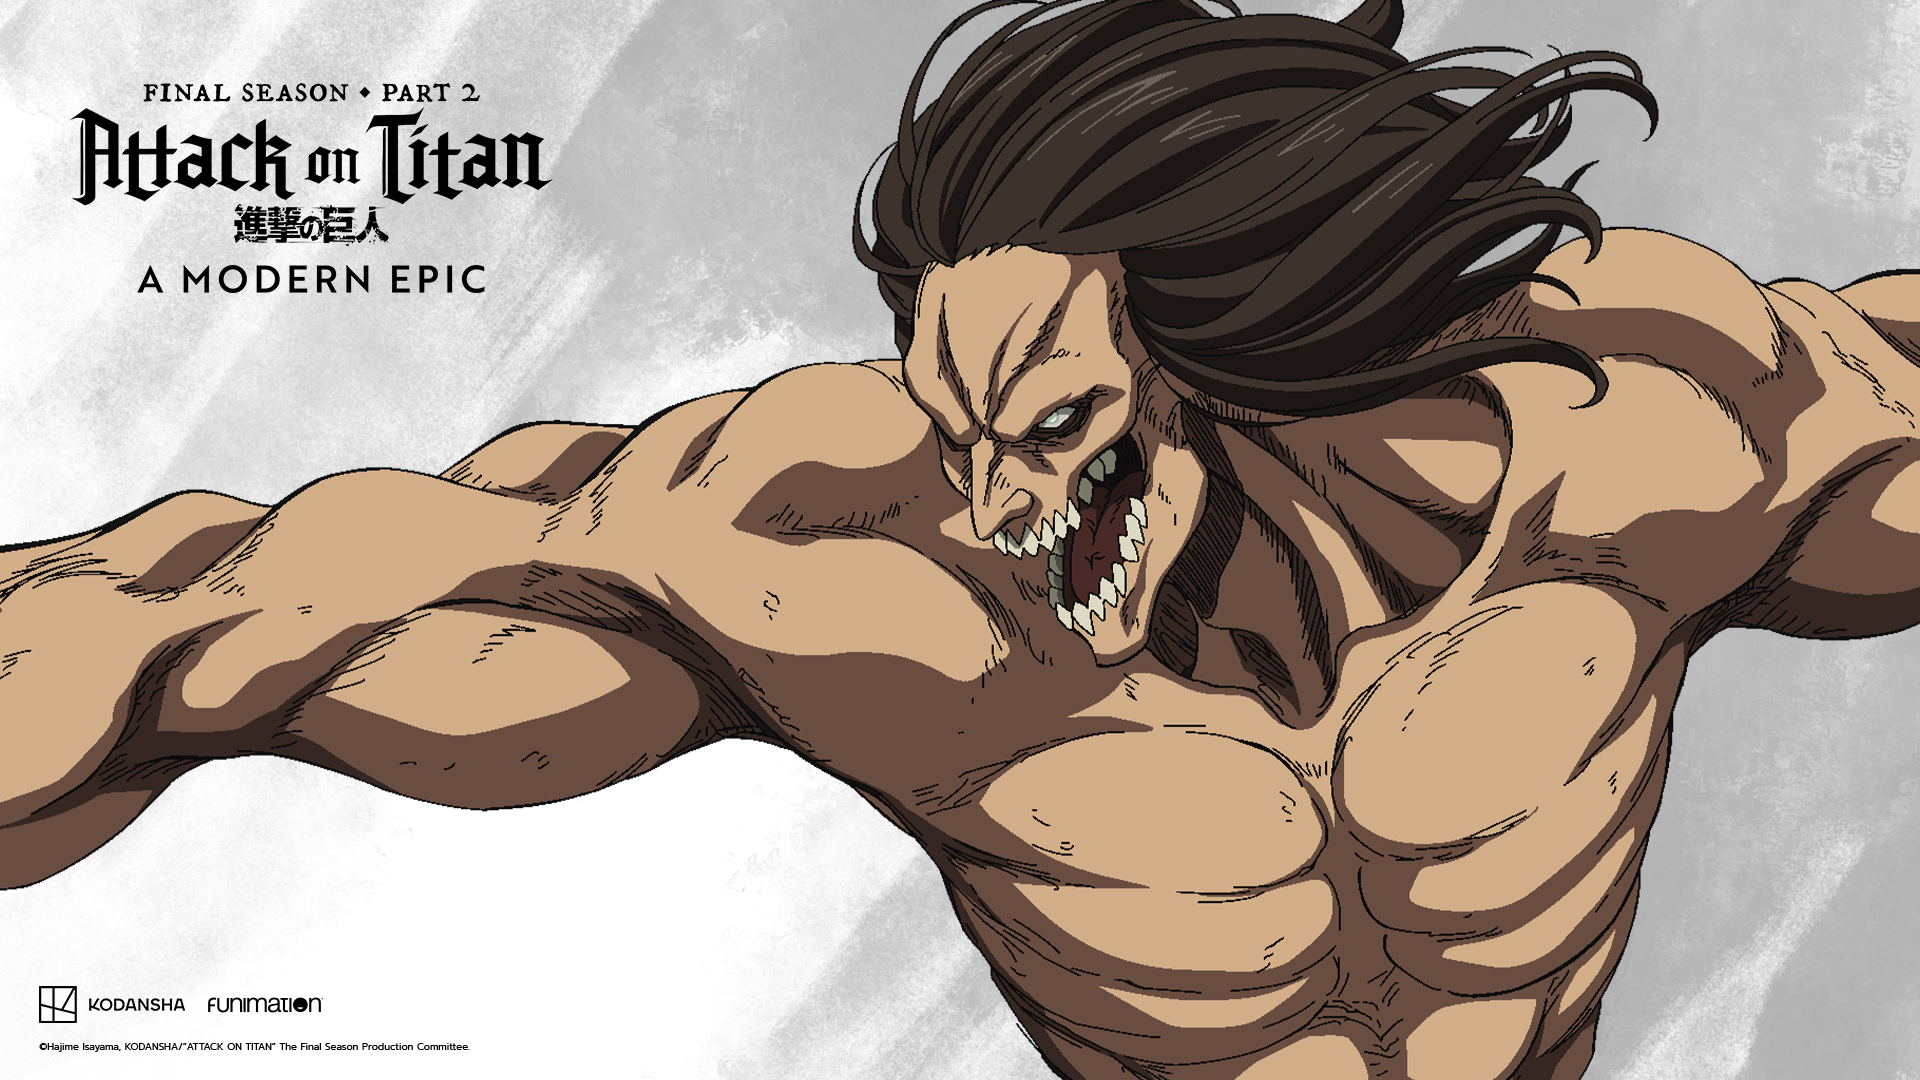 Attack on titan season 4 part 2 is currently ranked #2 on MAL : r/titanfolk